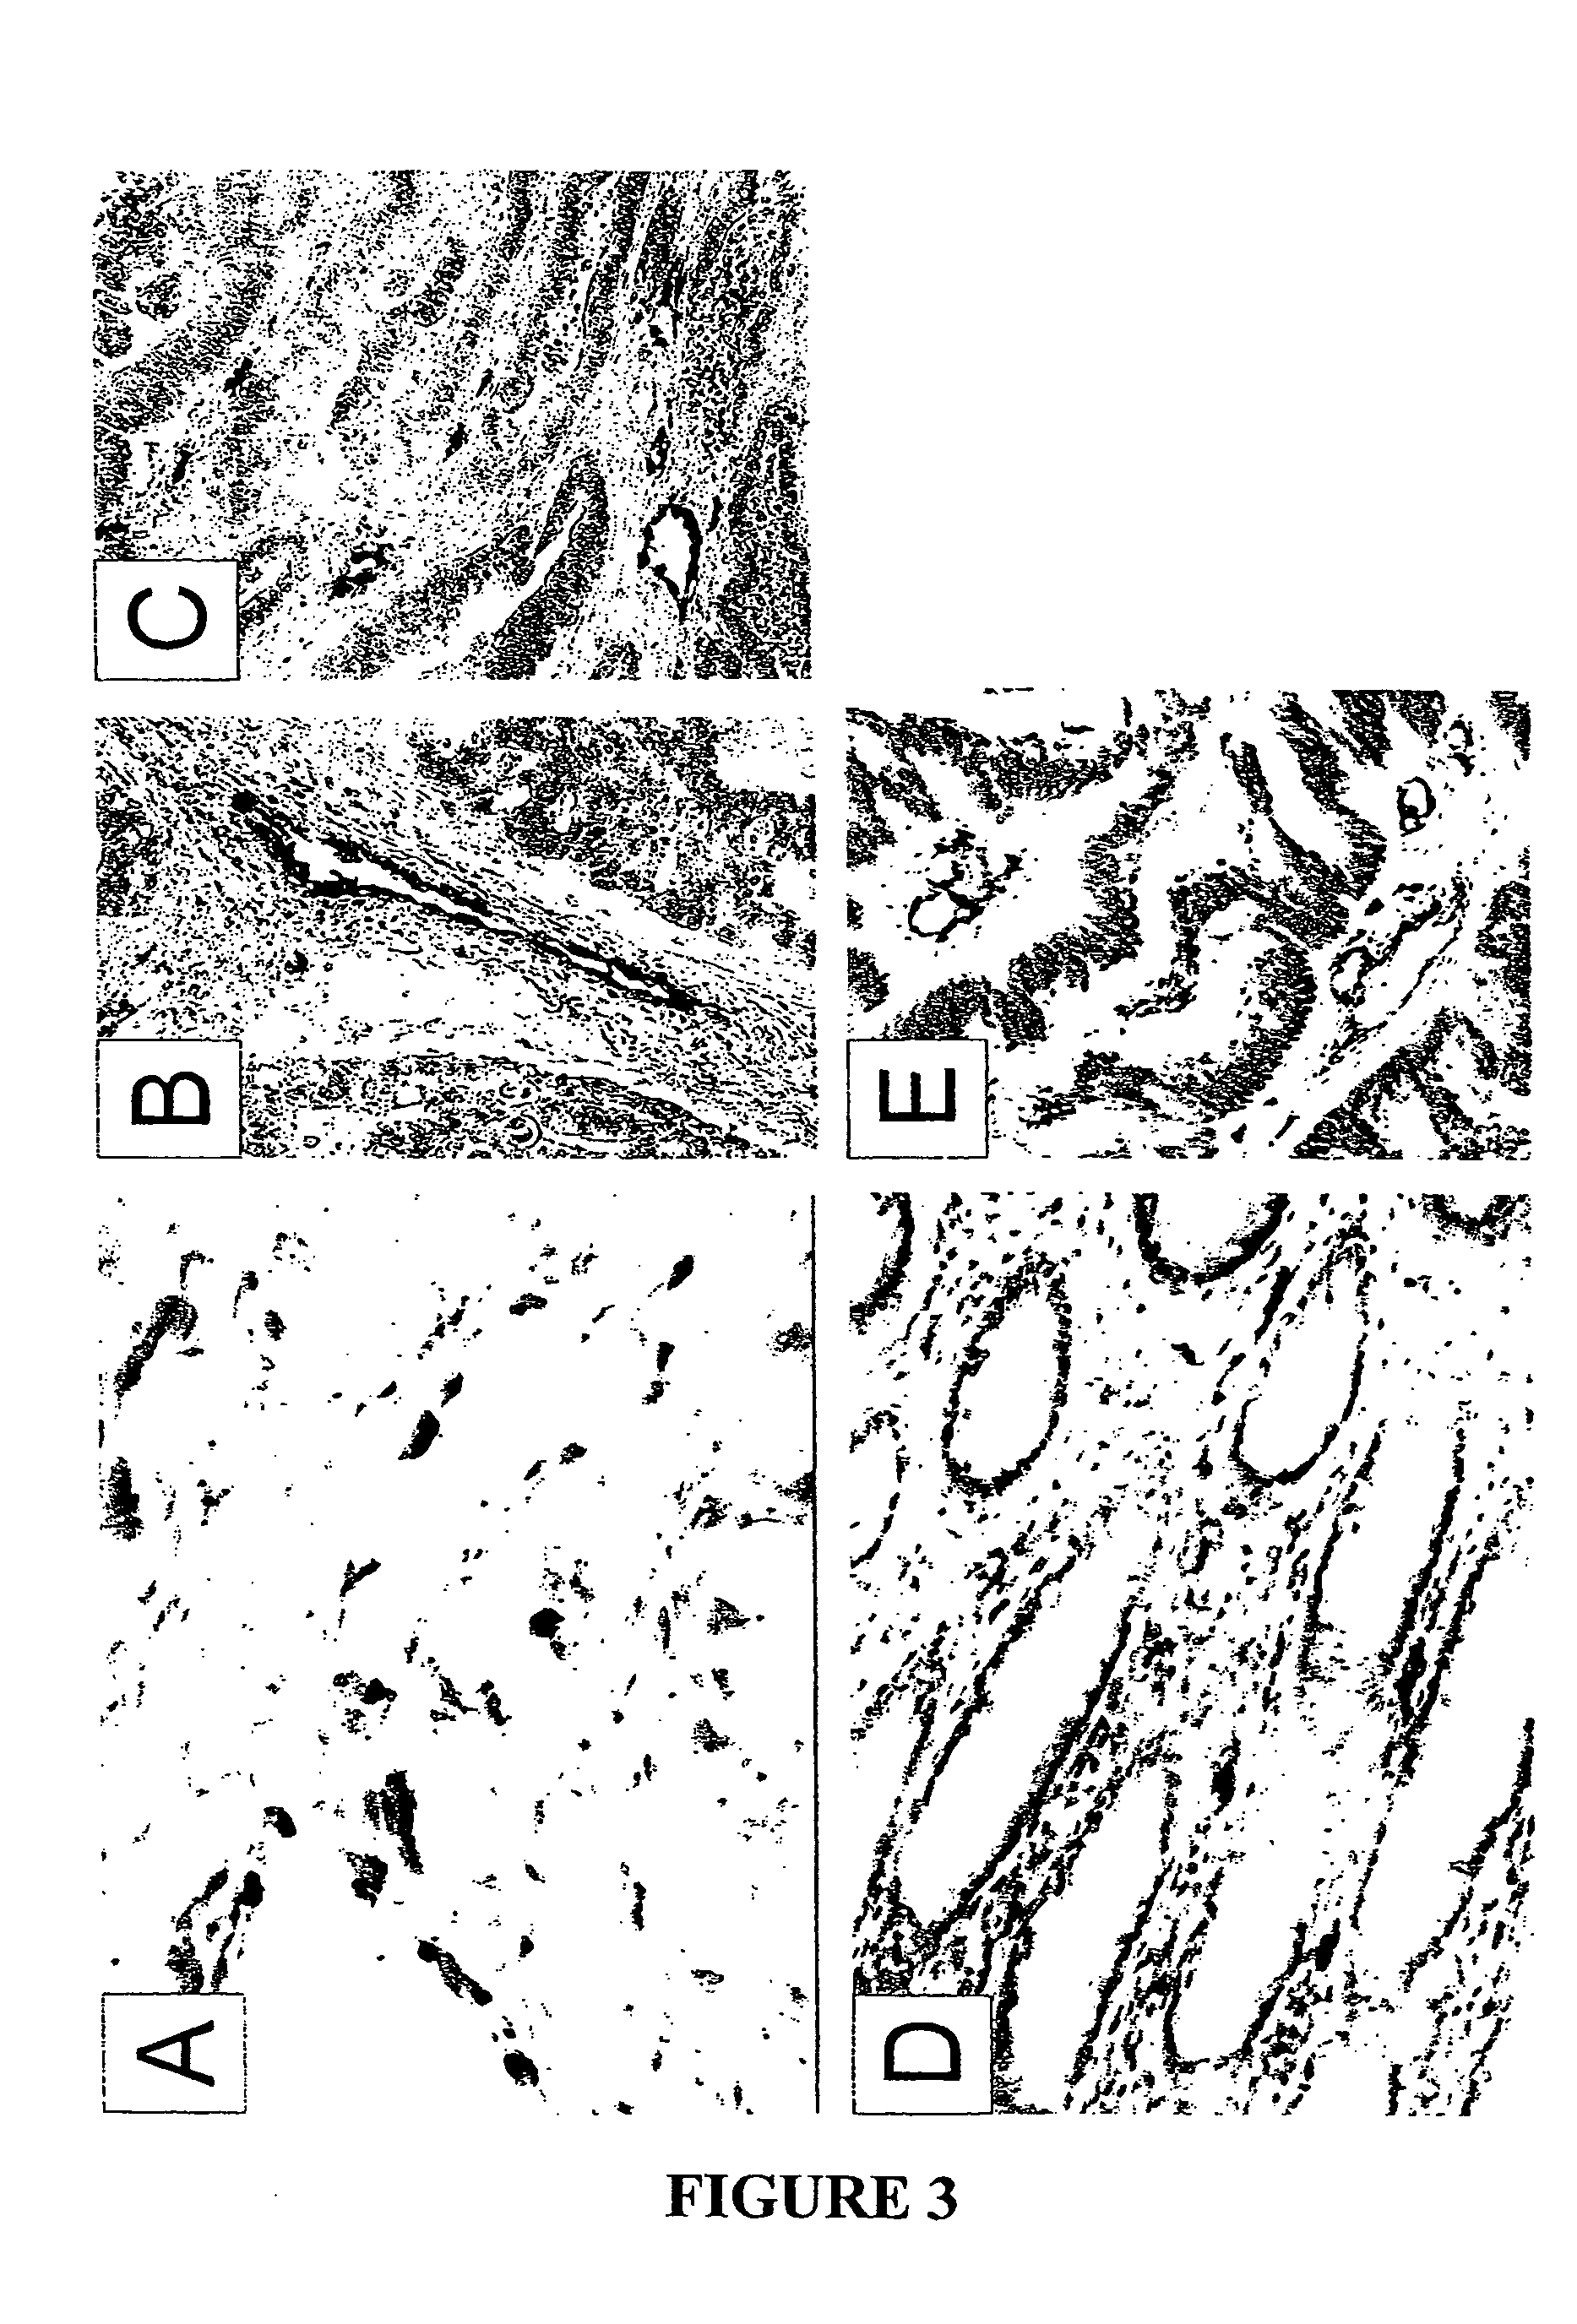 Endothelial cell expression patterns